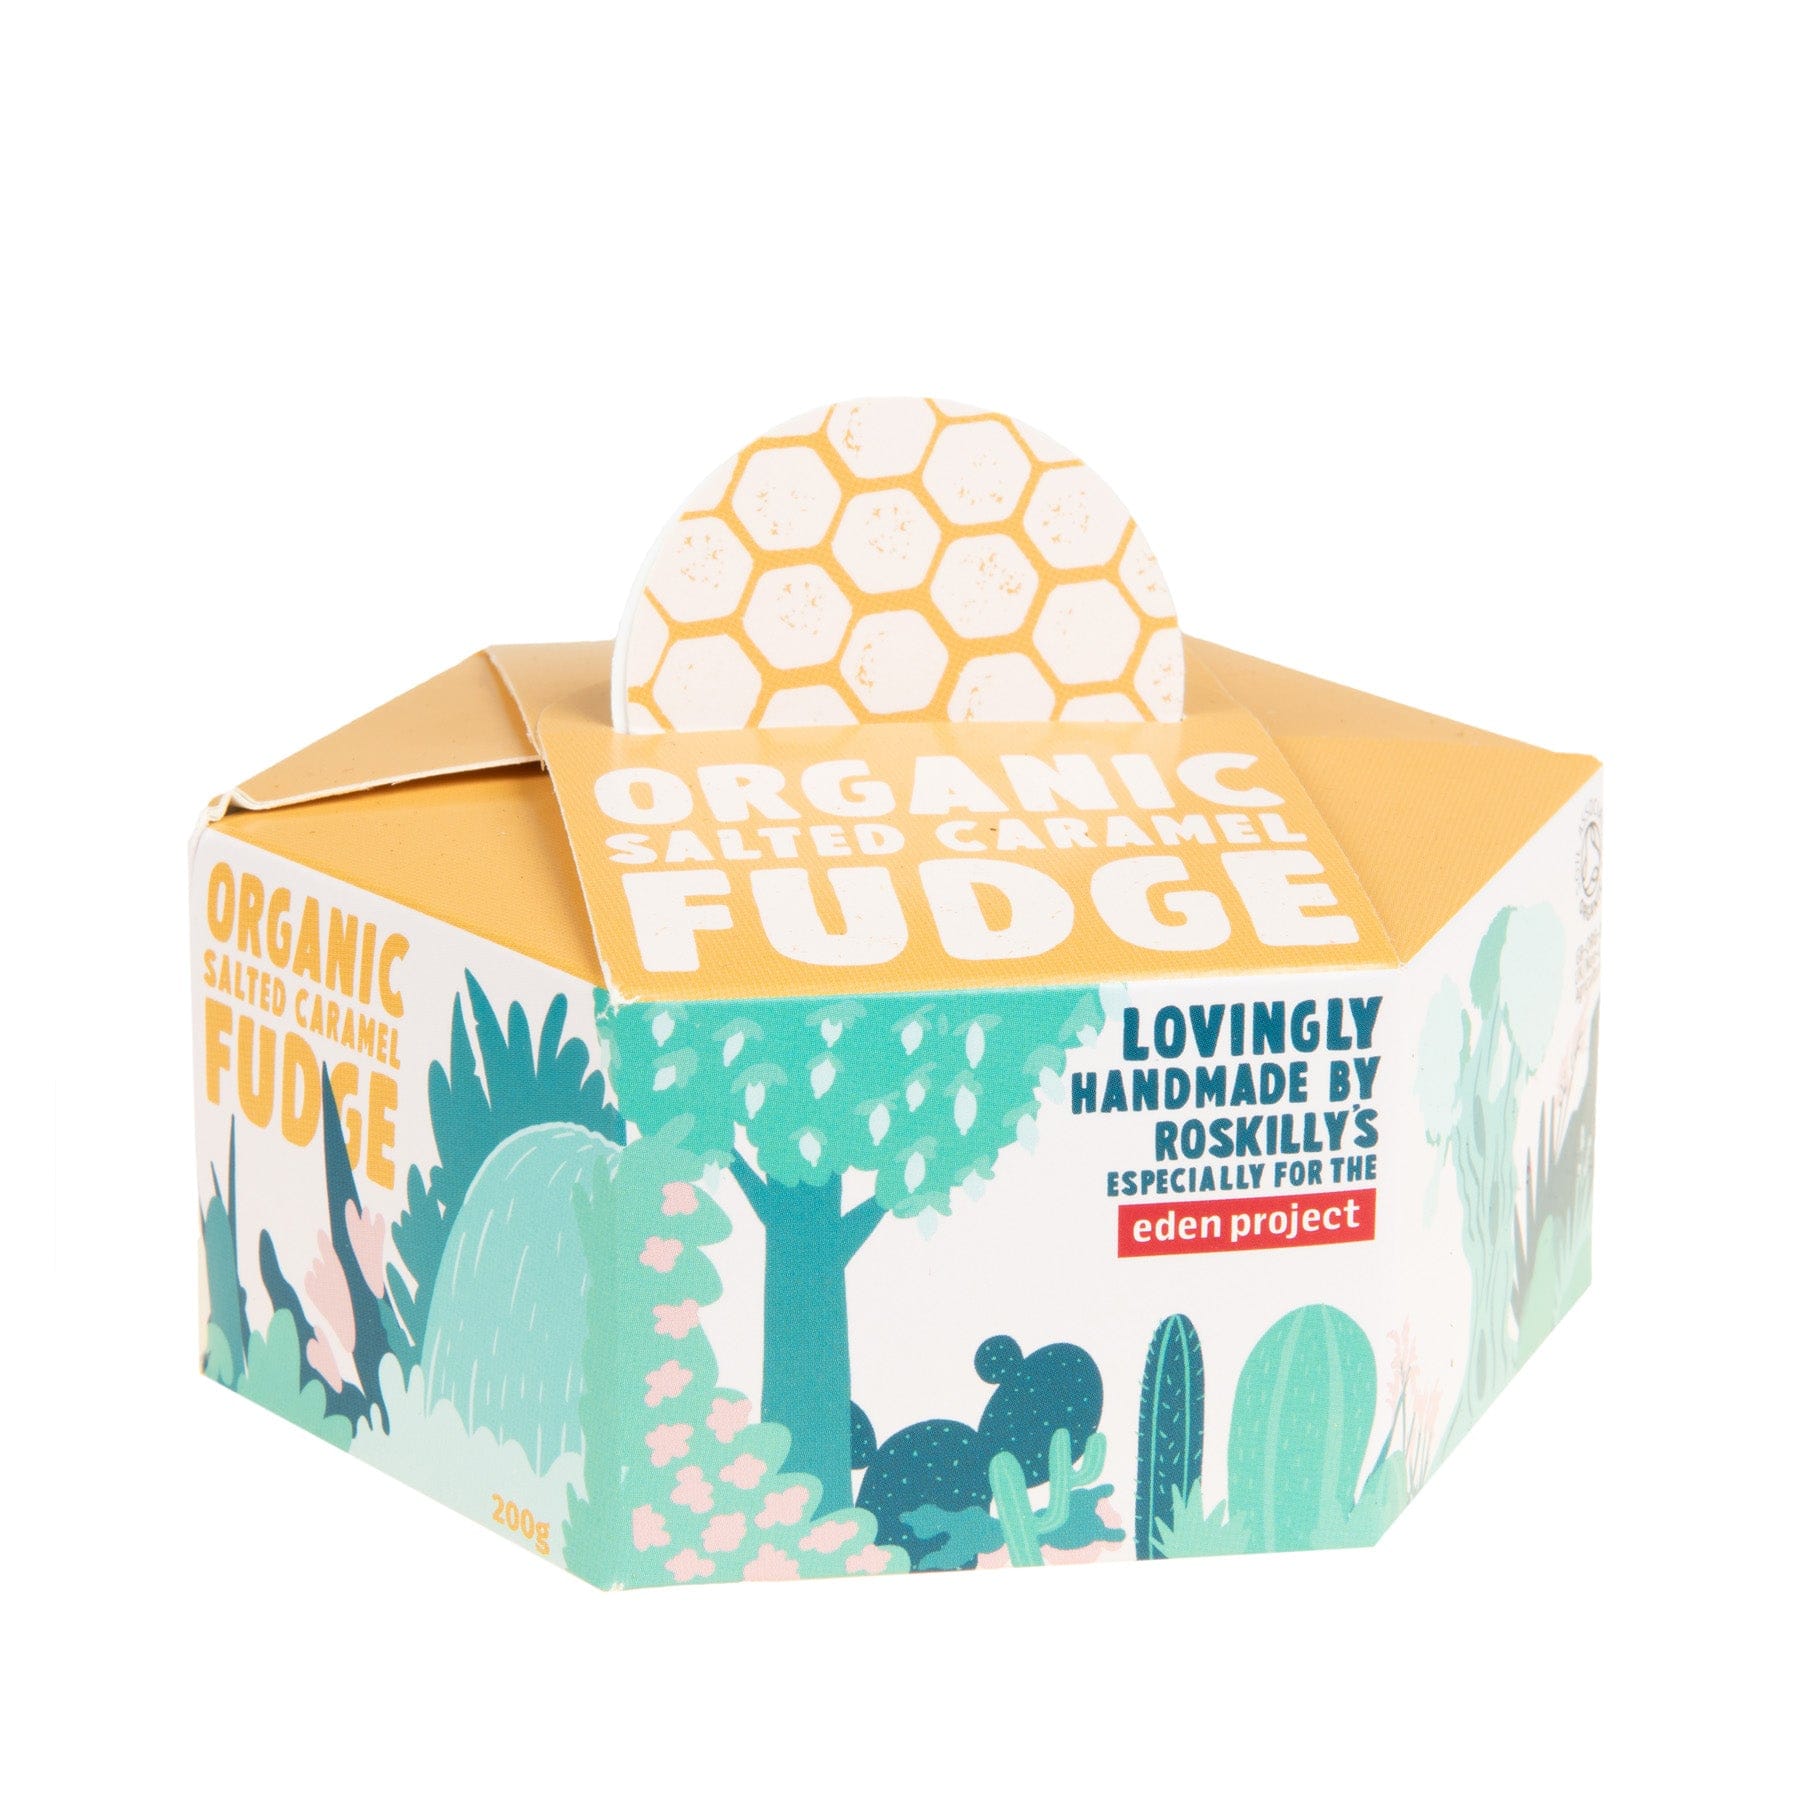 Organic Salted Caramel Fudge packaging with honeycomb pattern and green floral designs indicating natural ingredients, labeled as lovingly handmade by Roskilly's for the Eden Project, 200g box visible